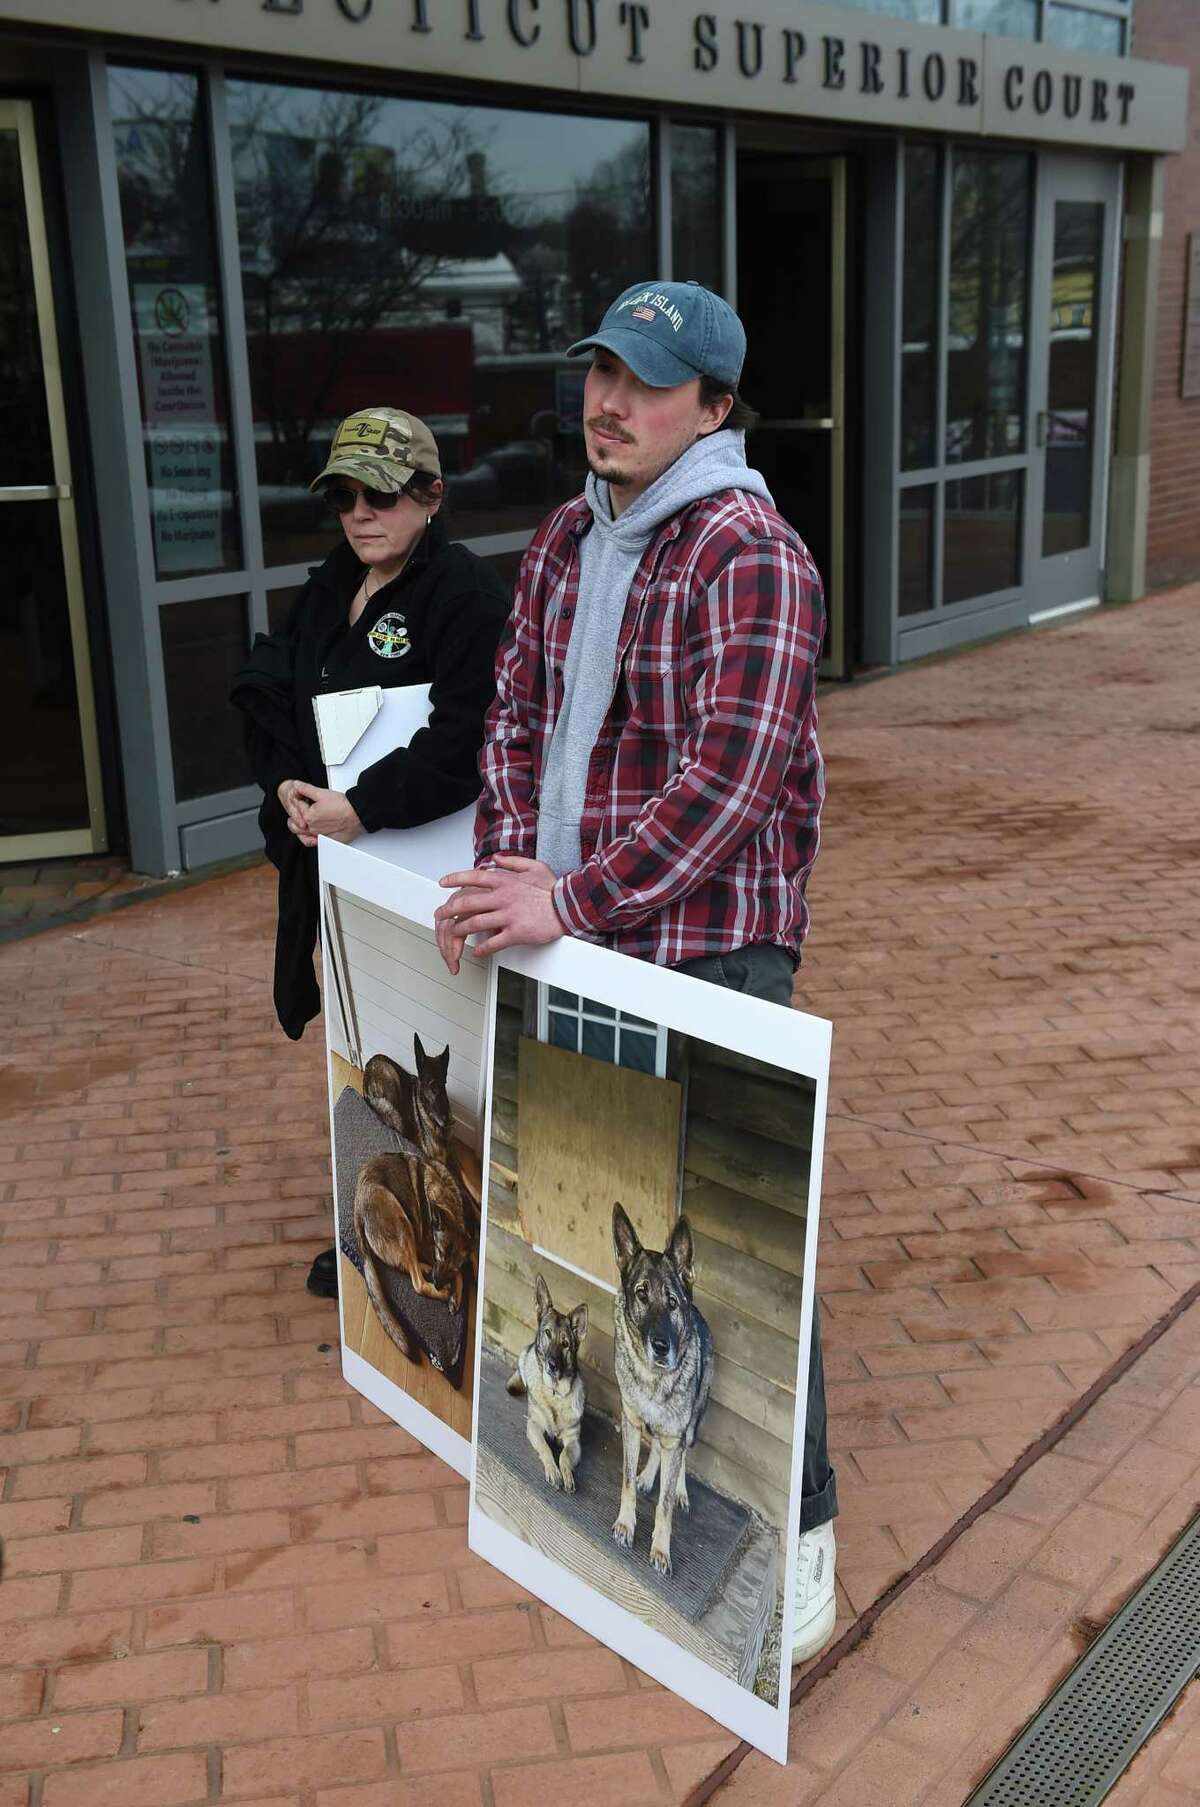 Shane Caviola with photographs of his family’s dogs Cimo, right, and Lieben, left, on a poster outside Danbury Superior Court on Wednesday. Michael Konschak has been charged in connection with the deaths of her two dogs.